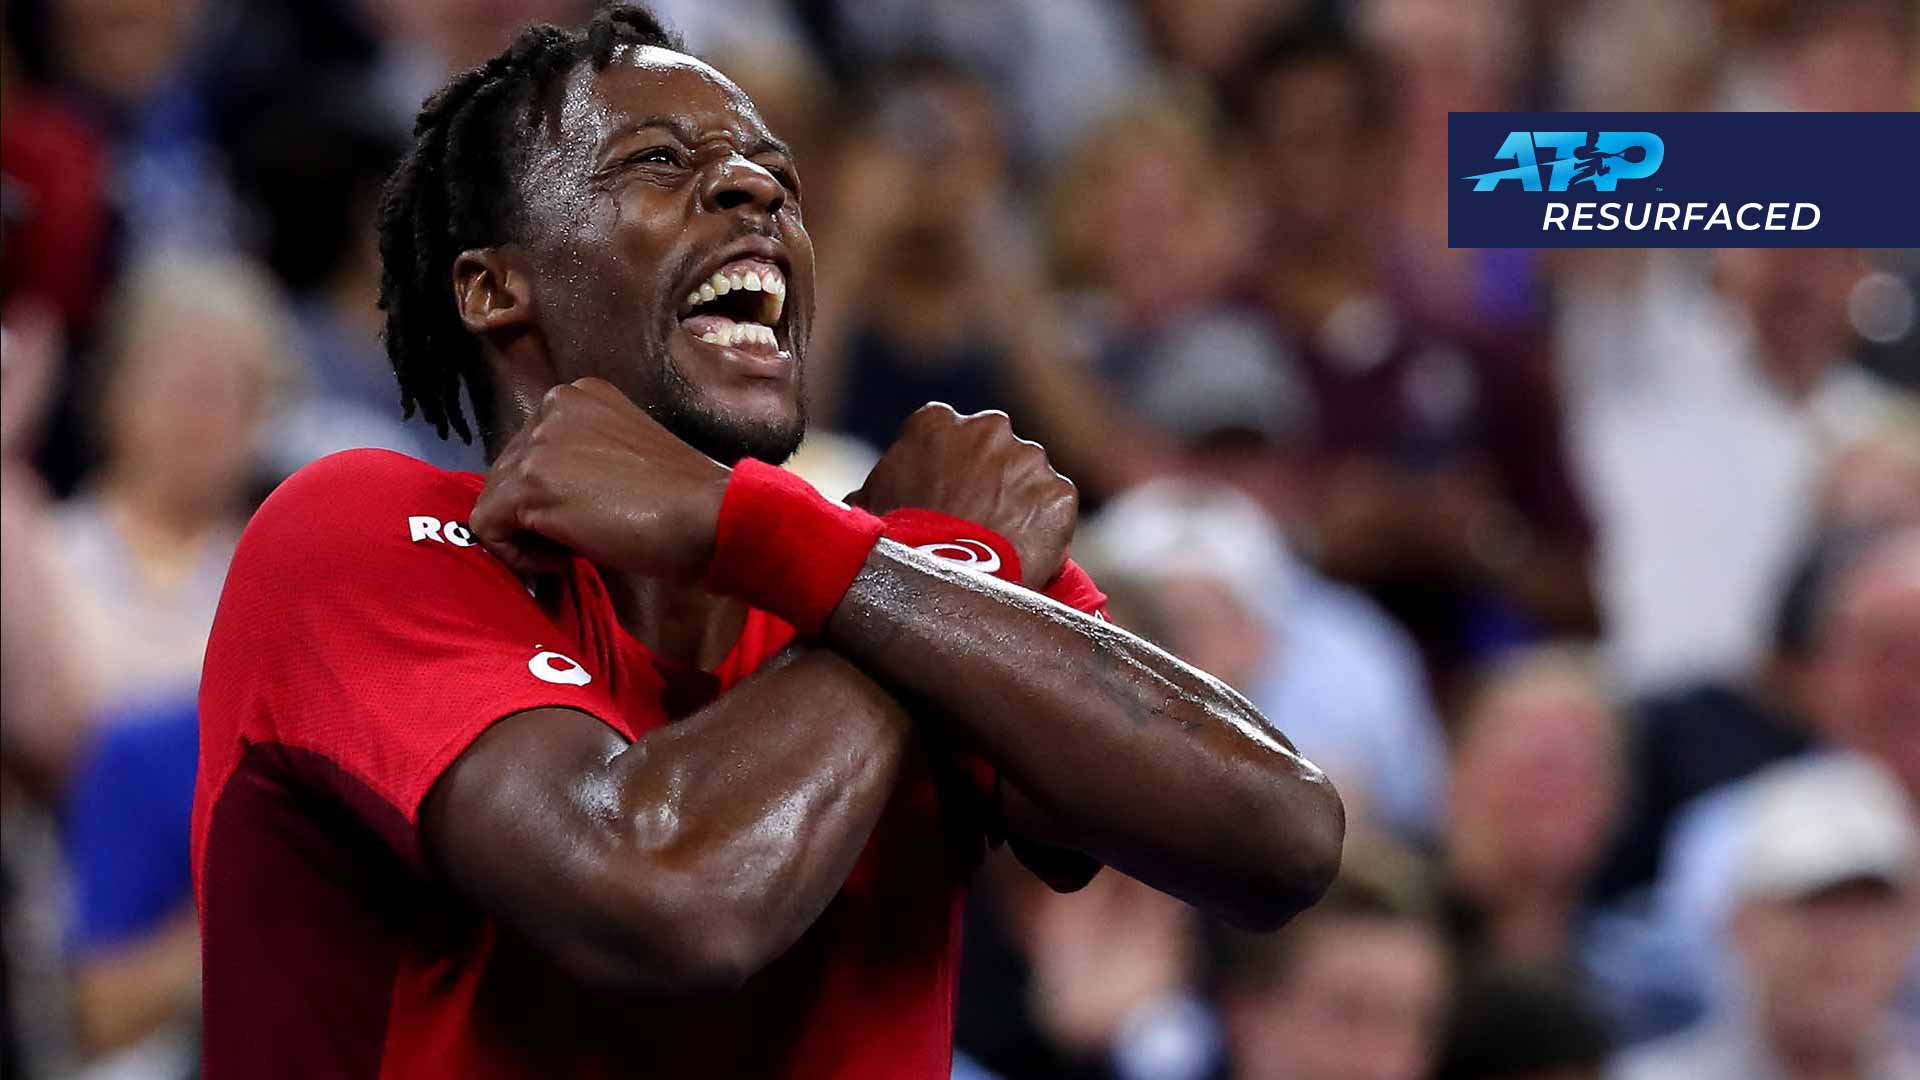 Gael Monfils is No. 9 in the FedEx ATP Rankings, only three spots off his career-high.